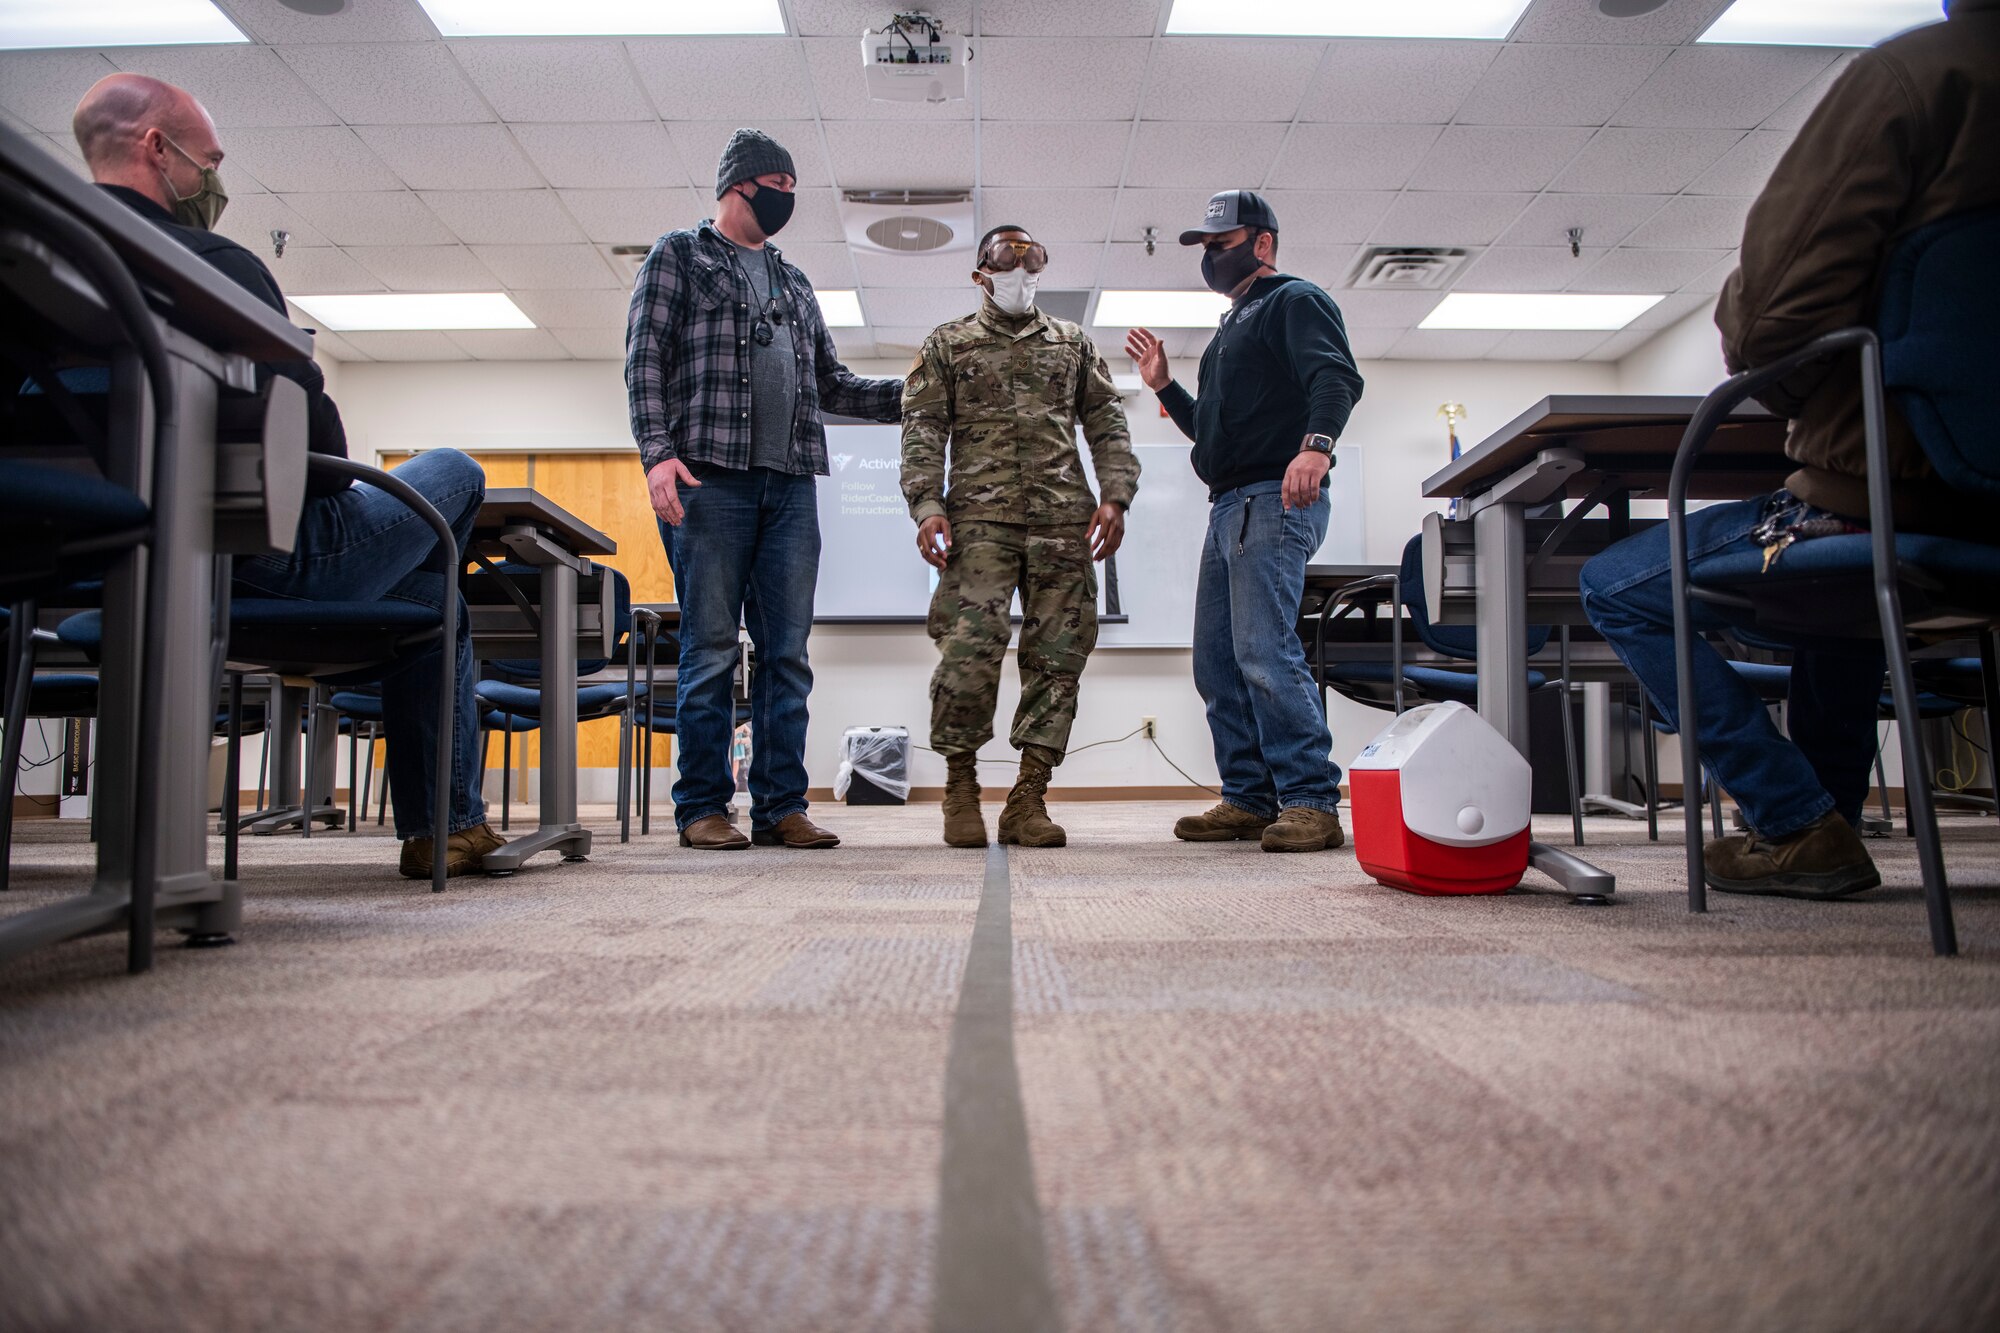 The 4th Fighter Wing safety office trains members across Seymour Johnson Air Force Base to become certified instructors for the Basic Riders Course.